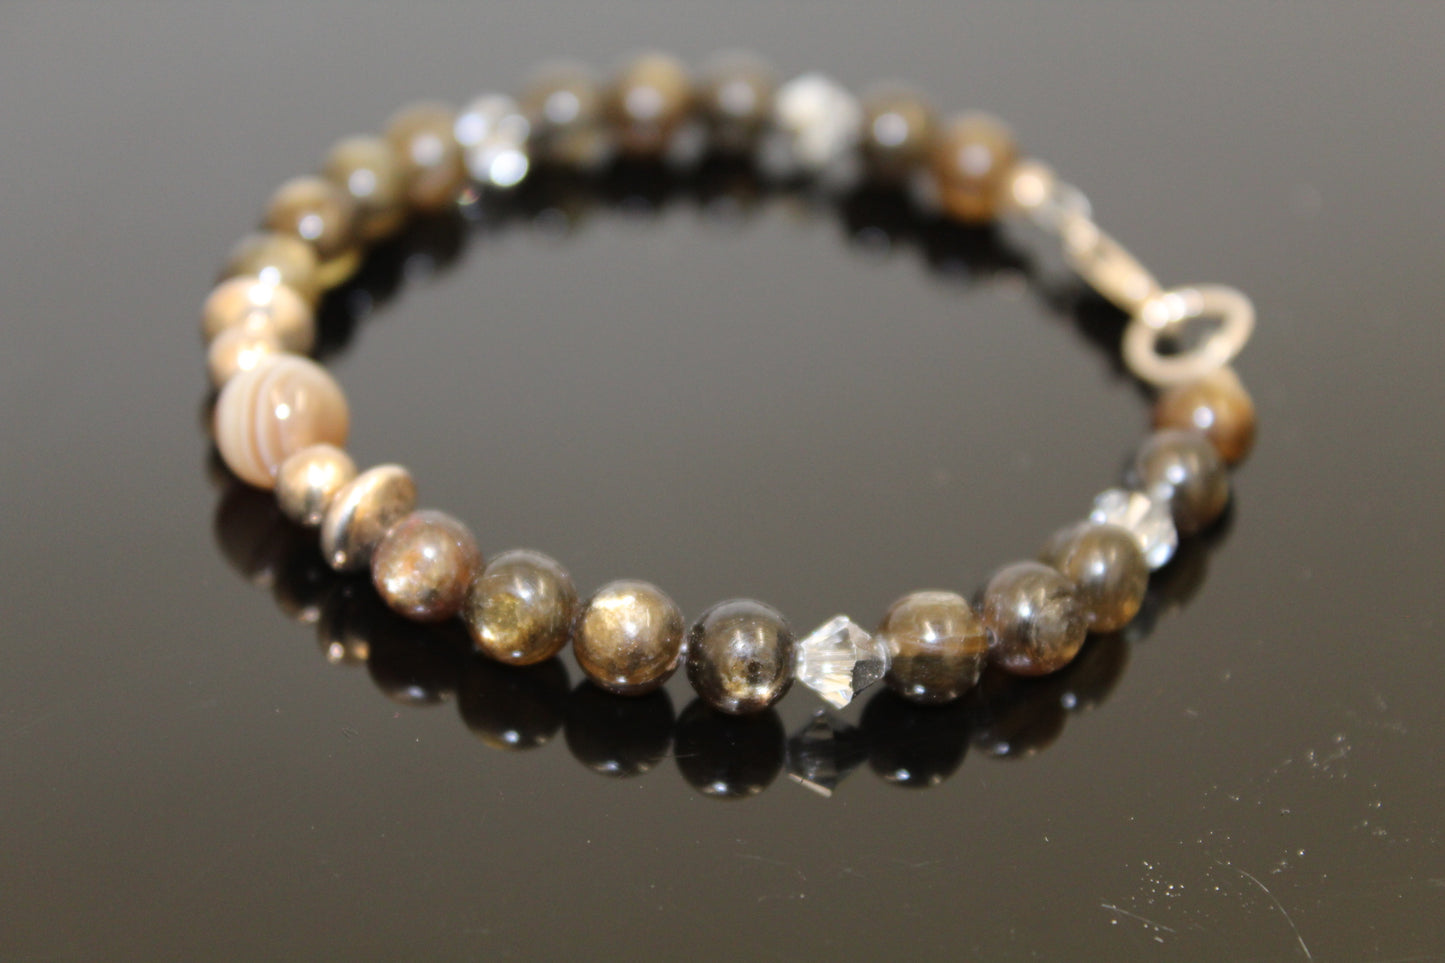 Golden Mica and Botswana Agate Bracelet with Sterling Silver Balls and Swarovski Crystals